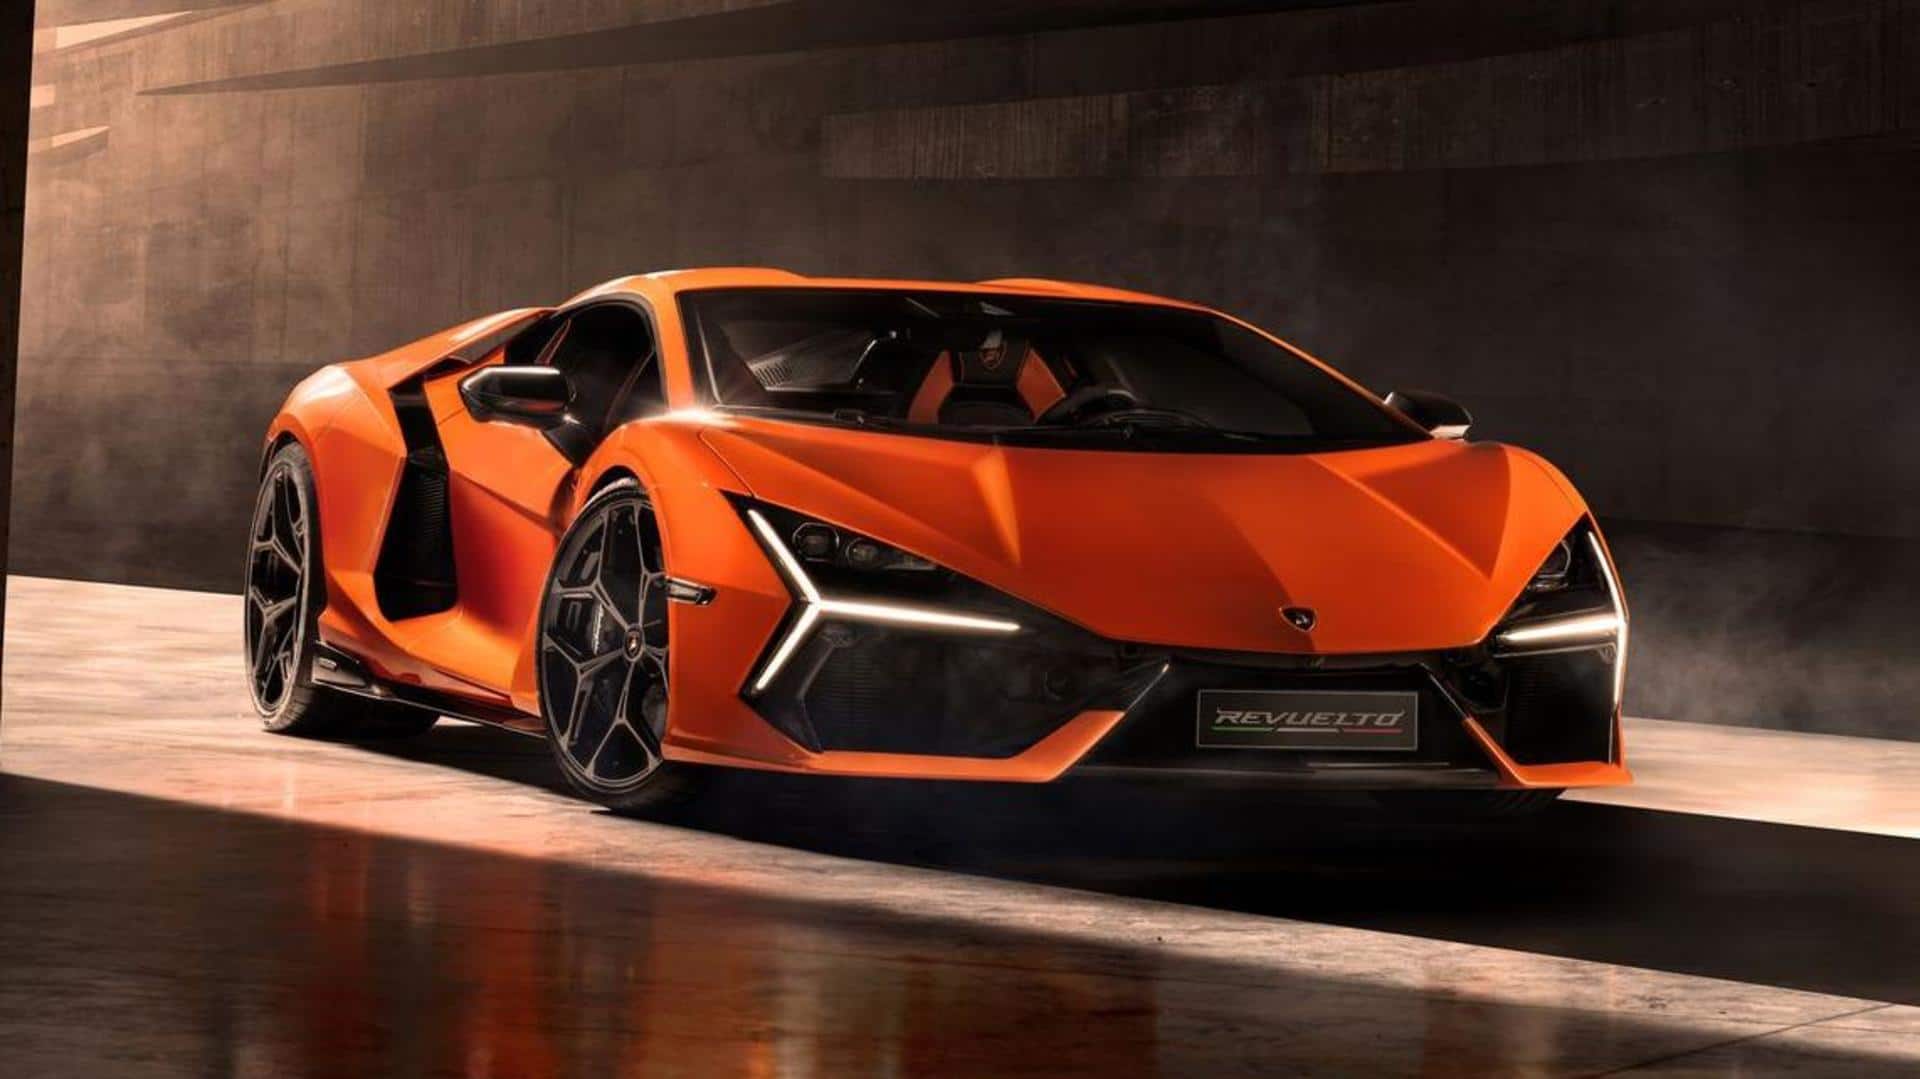 Lamborghini's first plug-in hybrid supercar is coming to India 